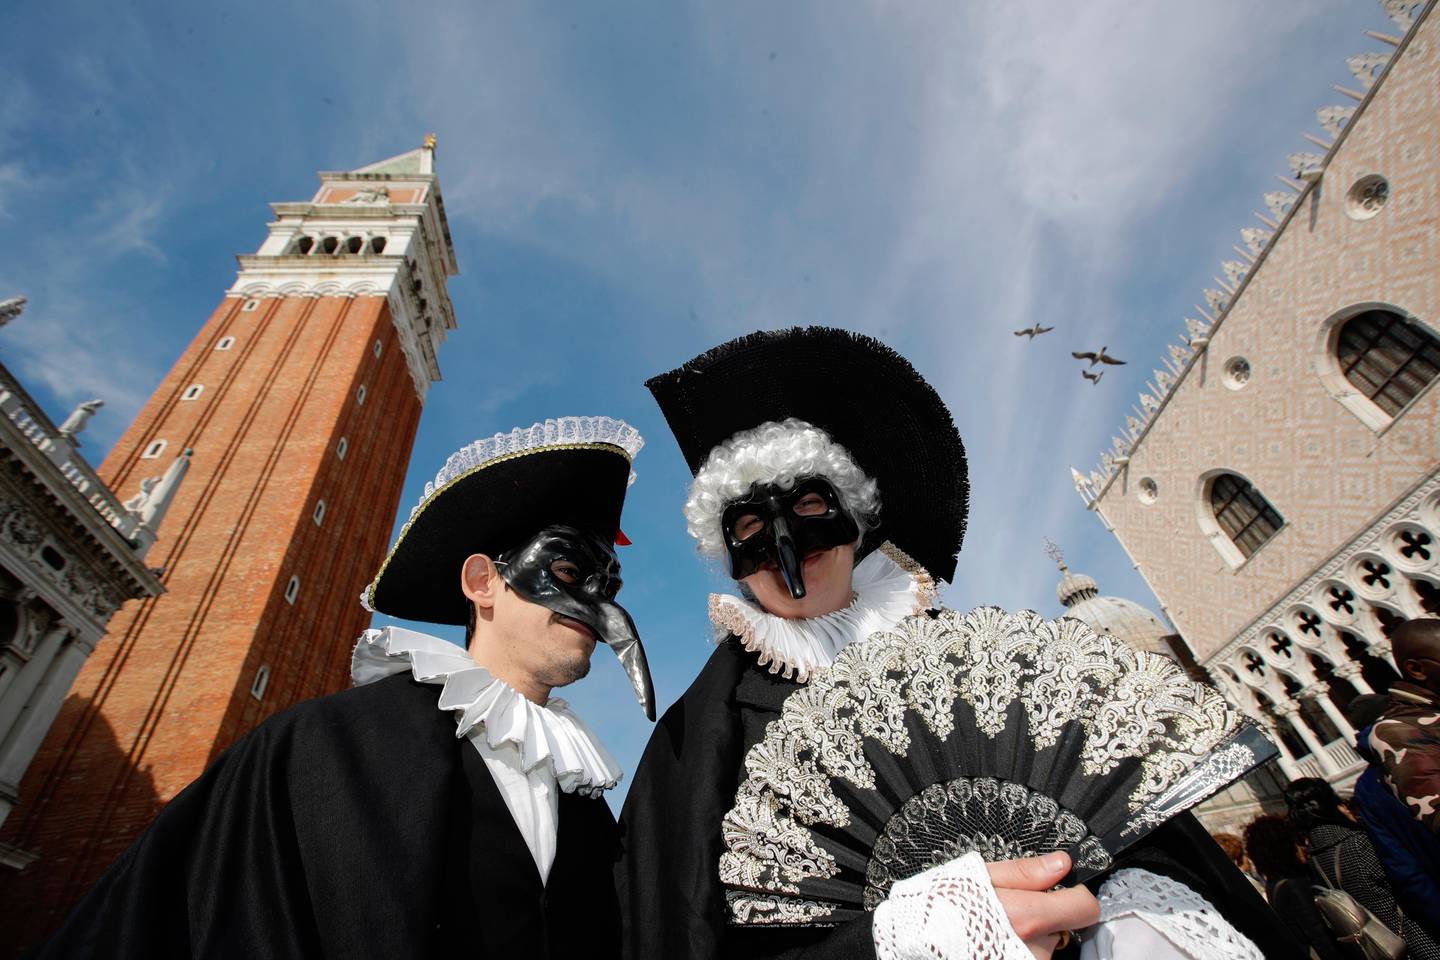 People wearing carnival costumes and masks gather in St. Mark's Square during carnival celebrations in Venice, Italy, Sunday, Feb.16, 2020. The Venice carnival in the historical lagoon city attracts people from around the world. (AP Photo/ Luca Bruno)